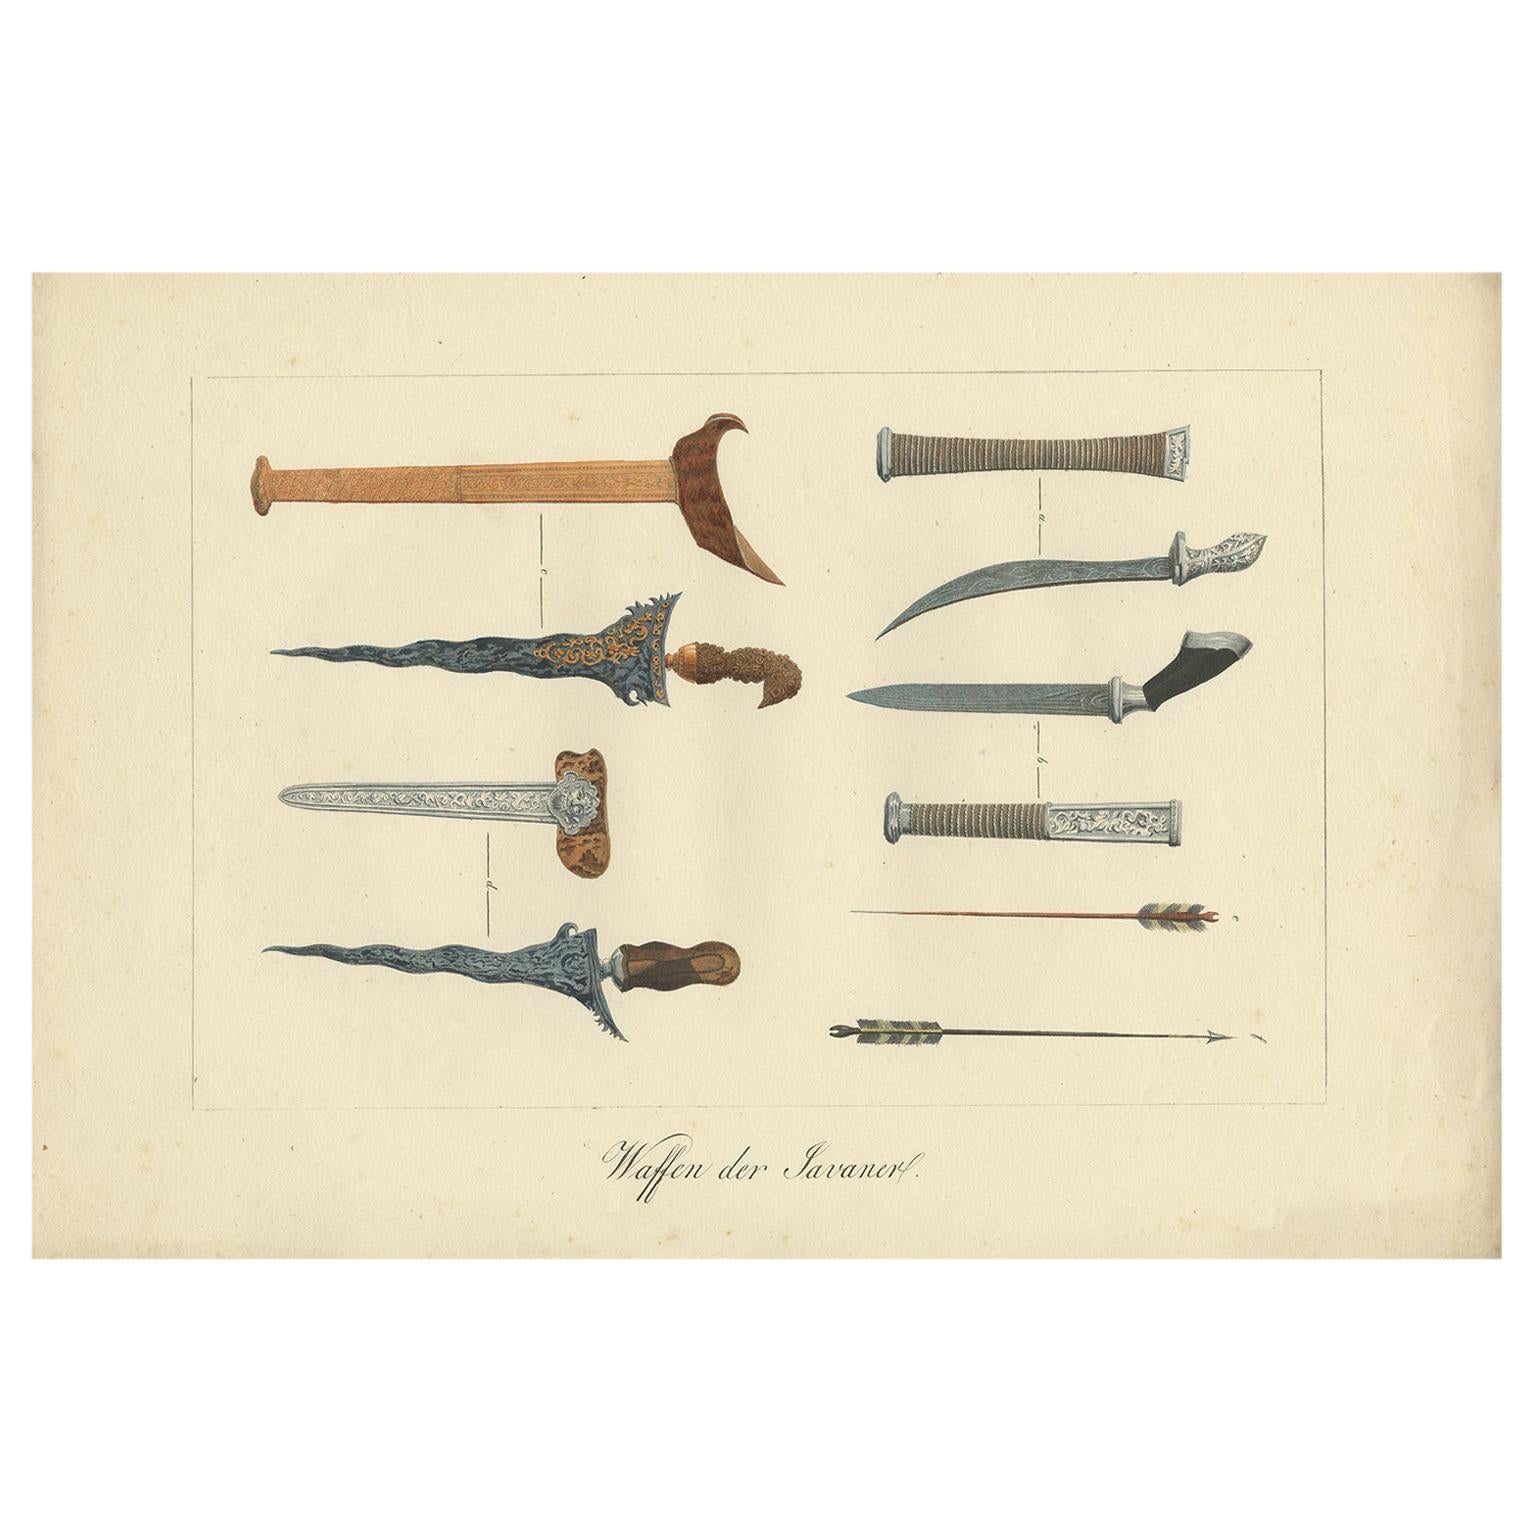 Decorative Antique Print of Traditional Weapons of the Javanese, Indonesia, 1830 For Sale